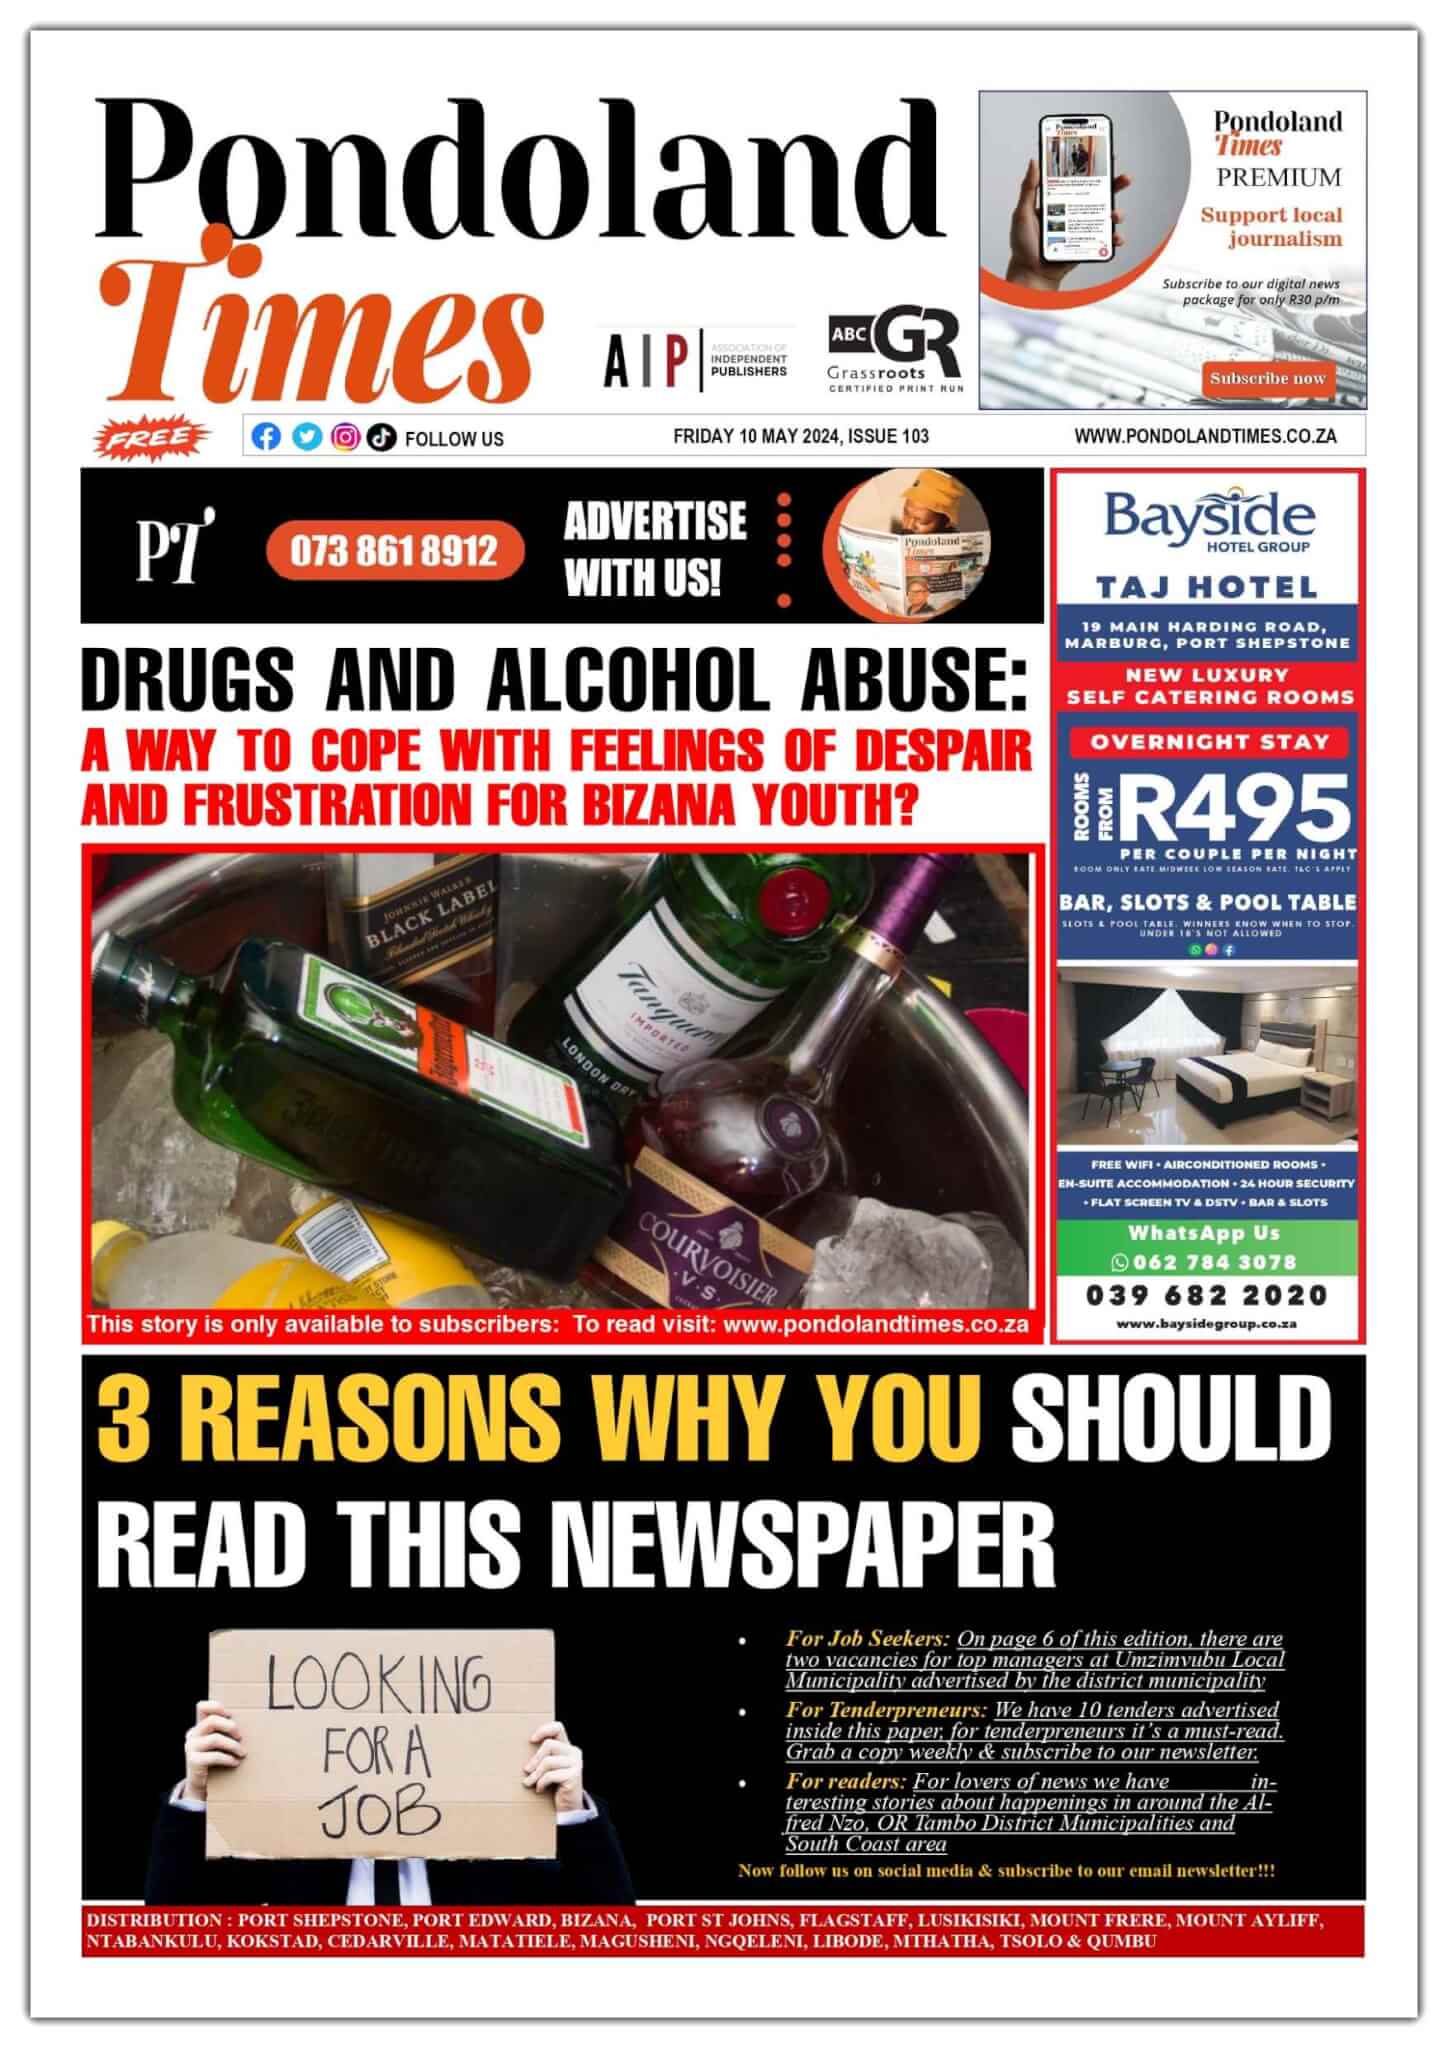 Pondoland times is an award winning community newspaper in Bizana, this image is the front page of edition number 103